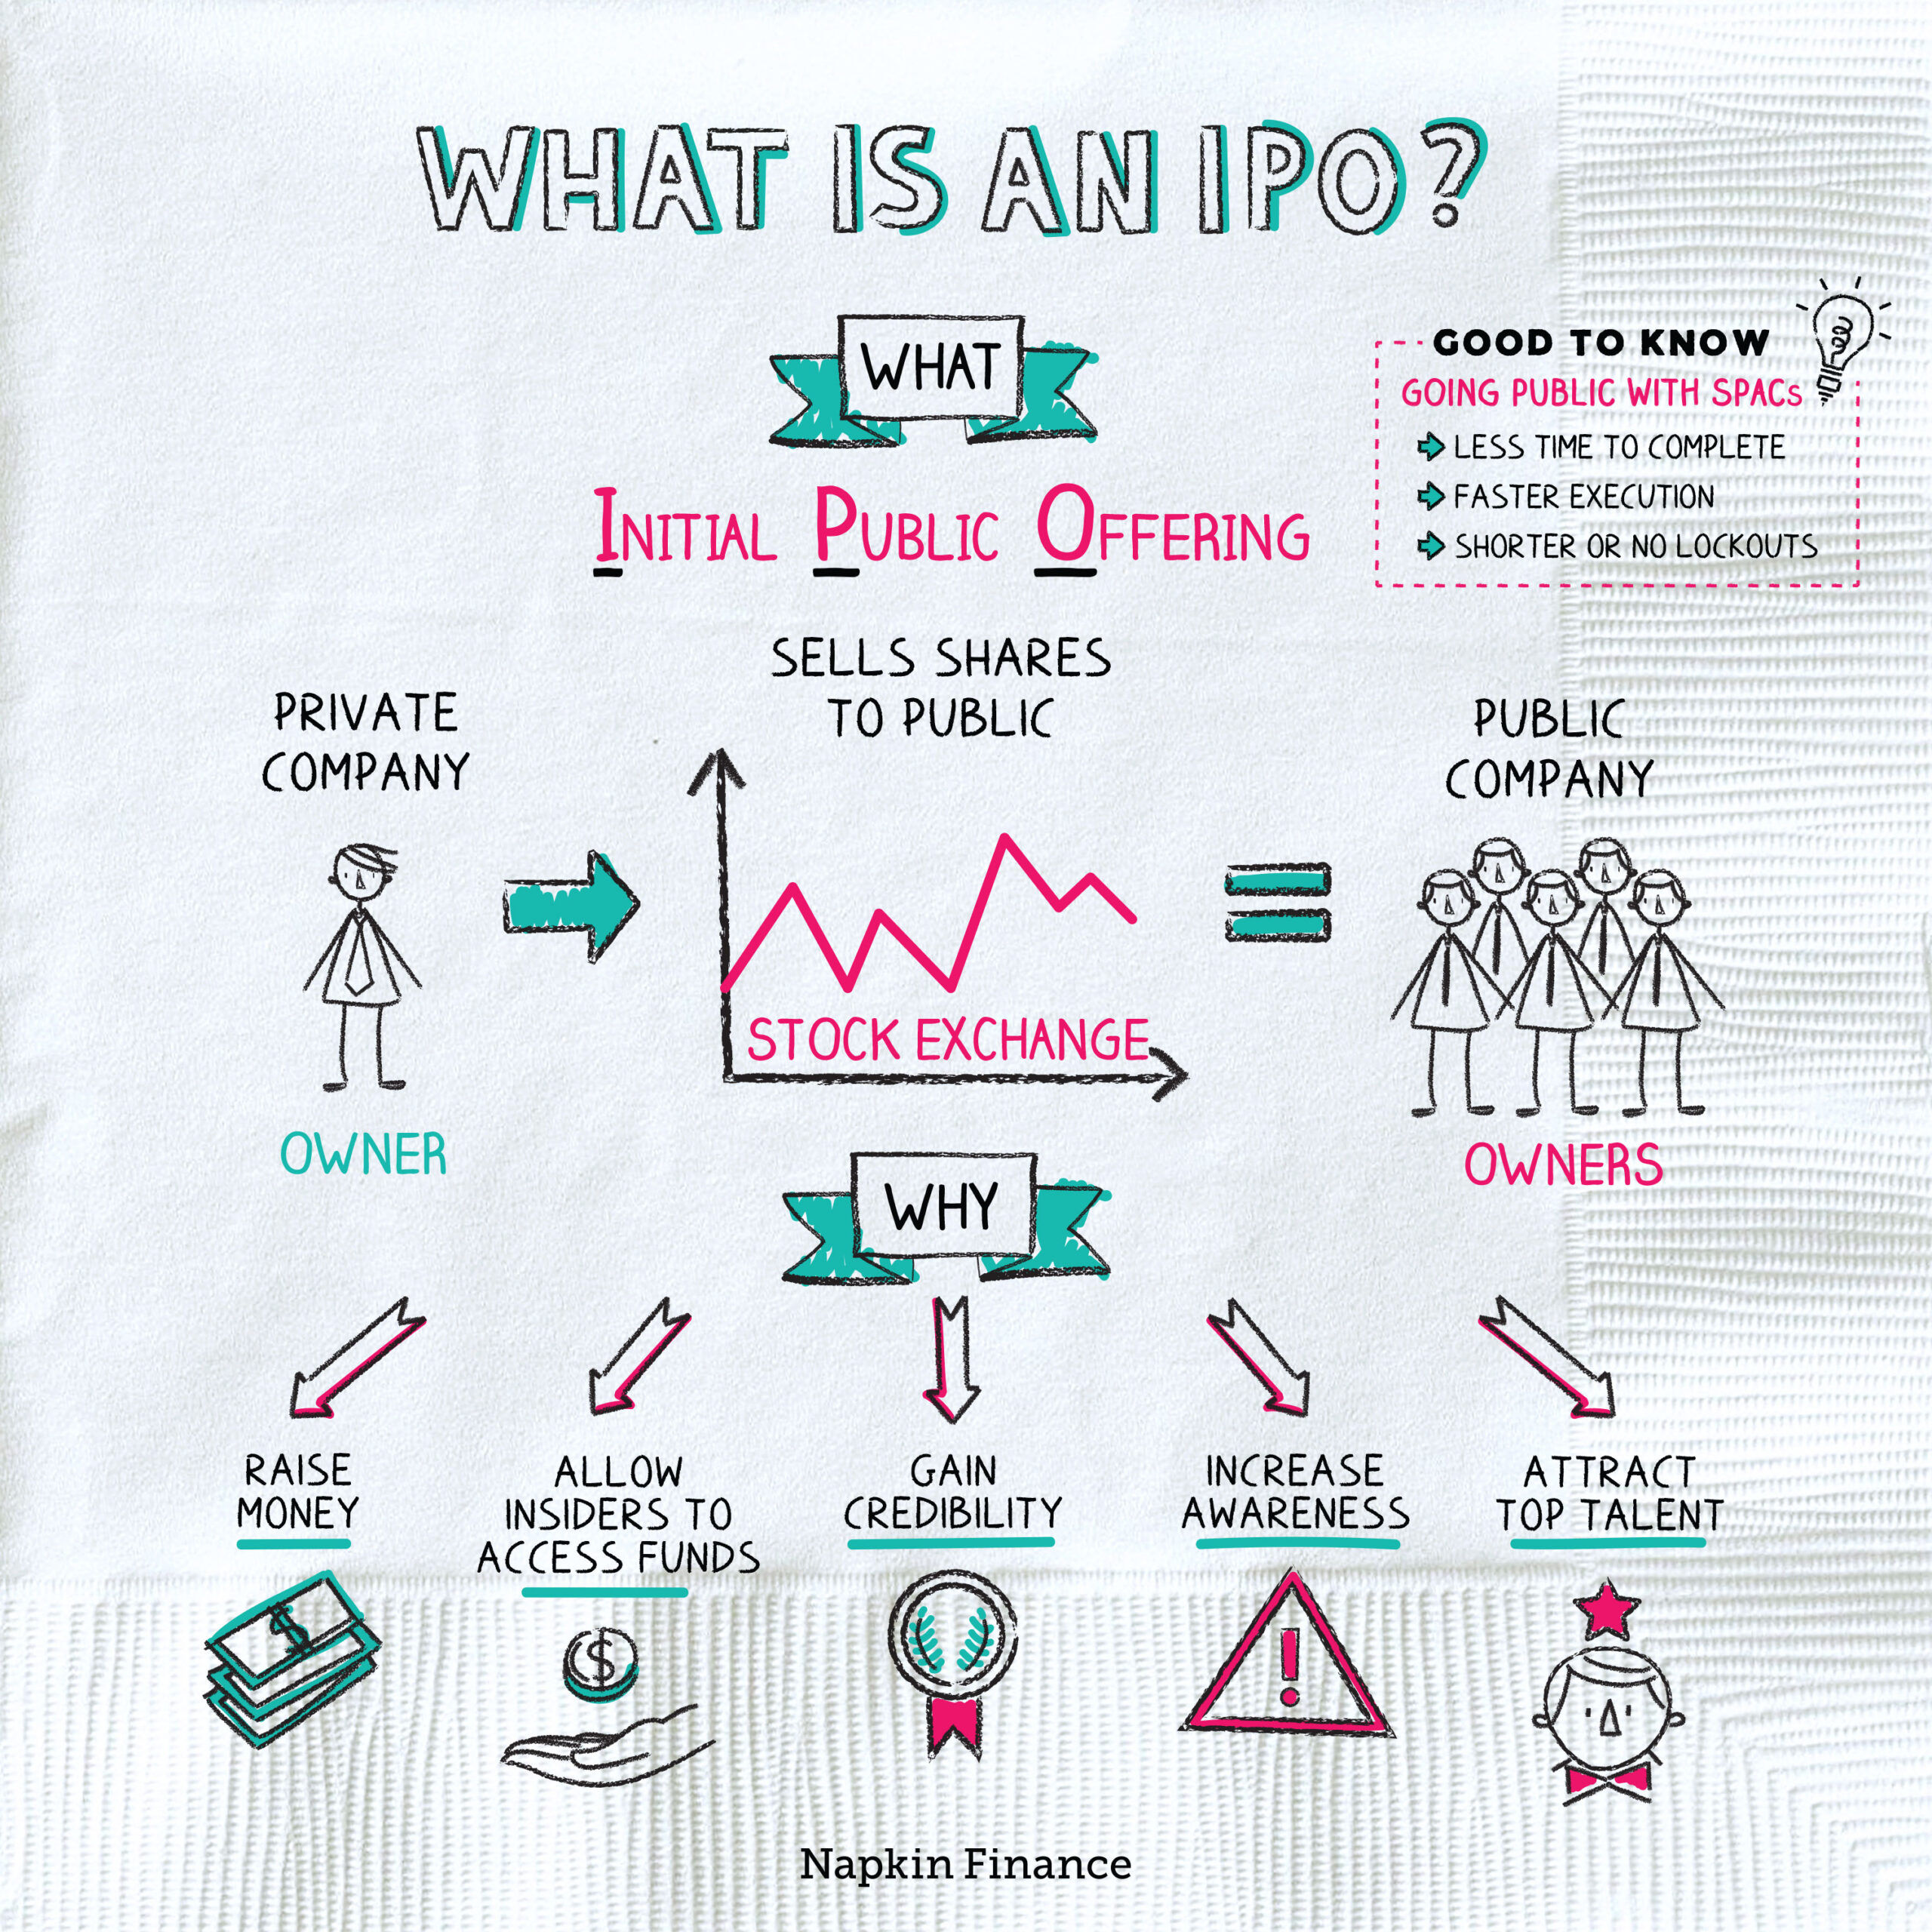 What Does IPO Mean